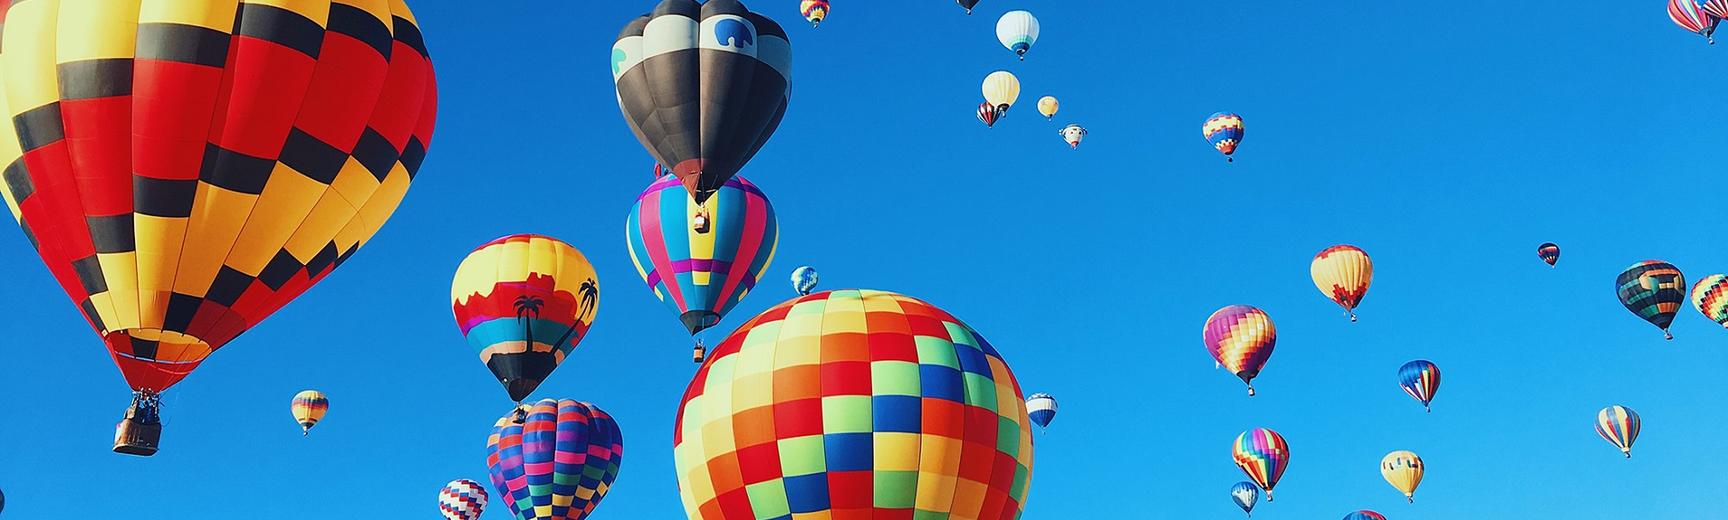 hot air balloons and blue sky